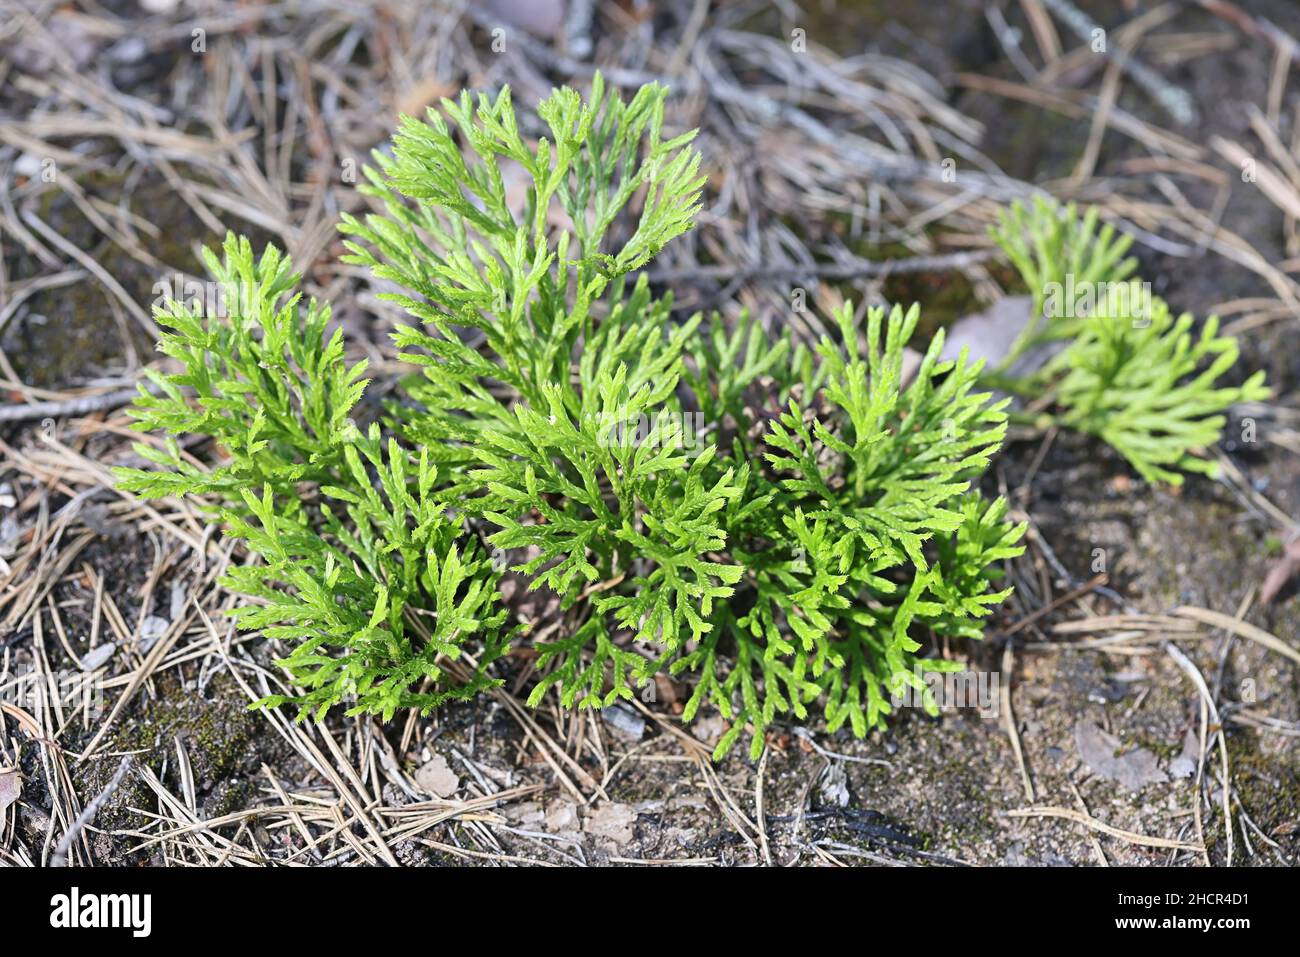 Diphasiastrum complanatum, known as groundcedar, creeping jenny, or northern running-pine, wild plant from Finland Stock Photo